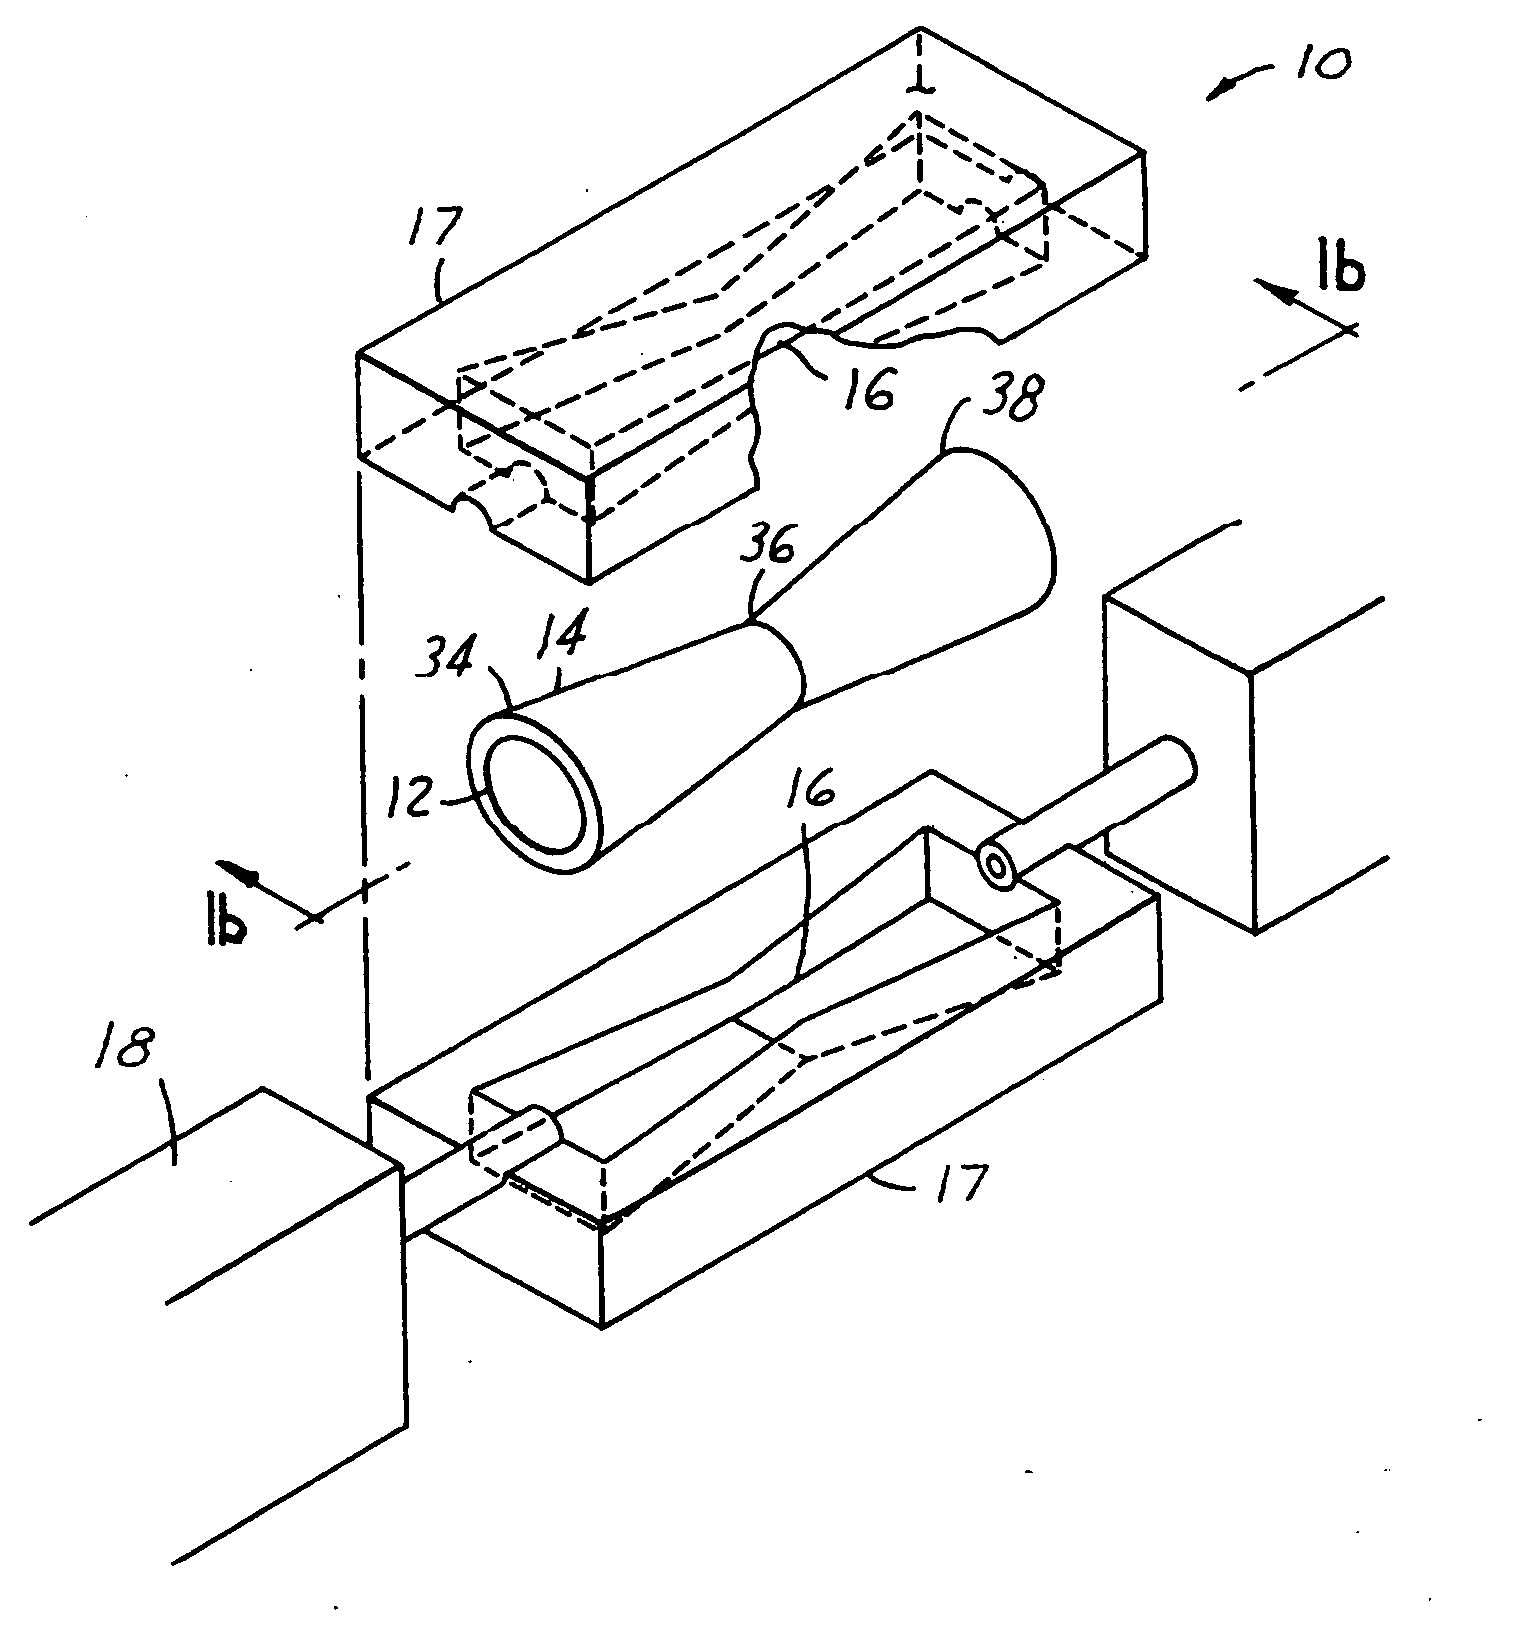 Component specific tube banks for hydroforming body structure components